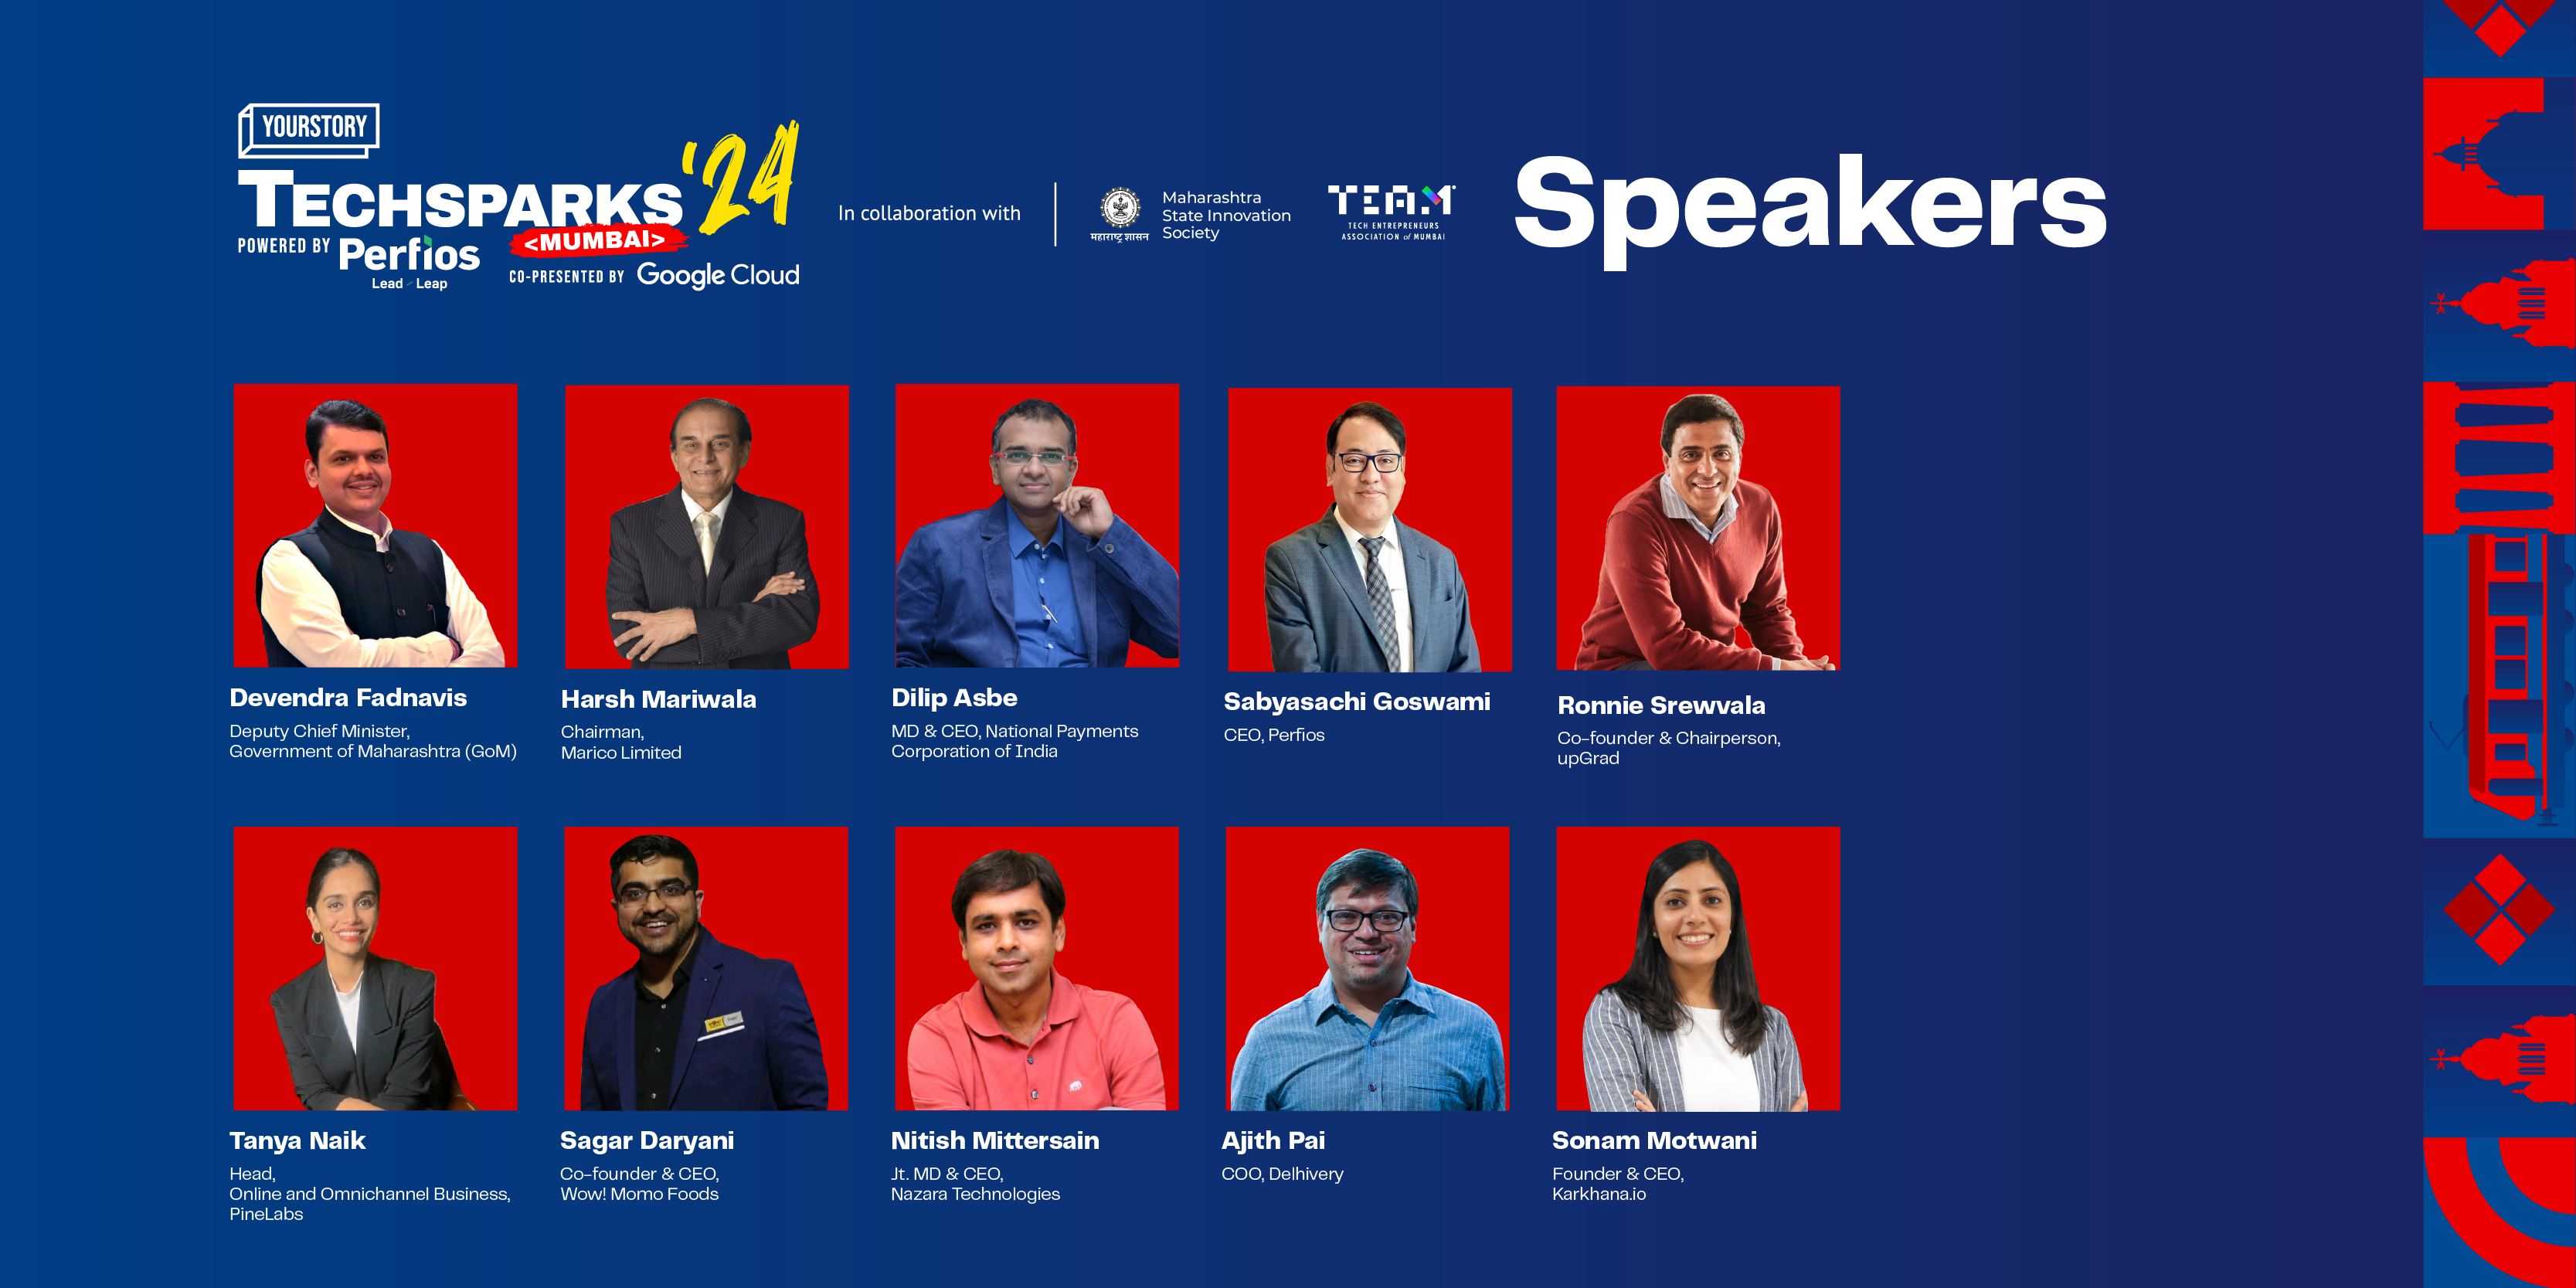 Meet the entrepreneurs shaping India’s next wave of growth, only at TechSparks Mumbai